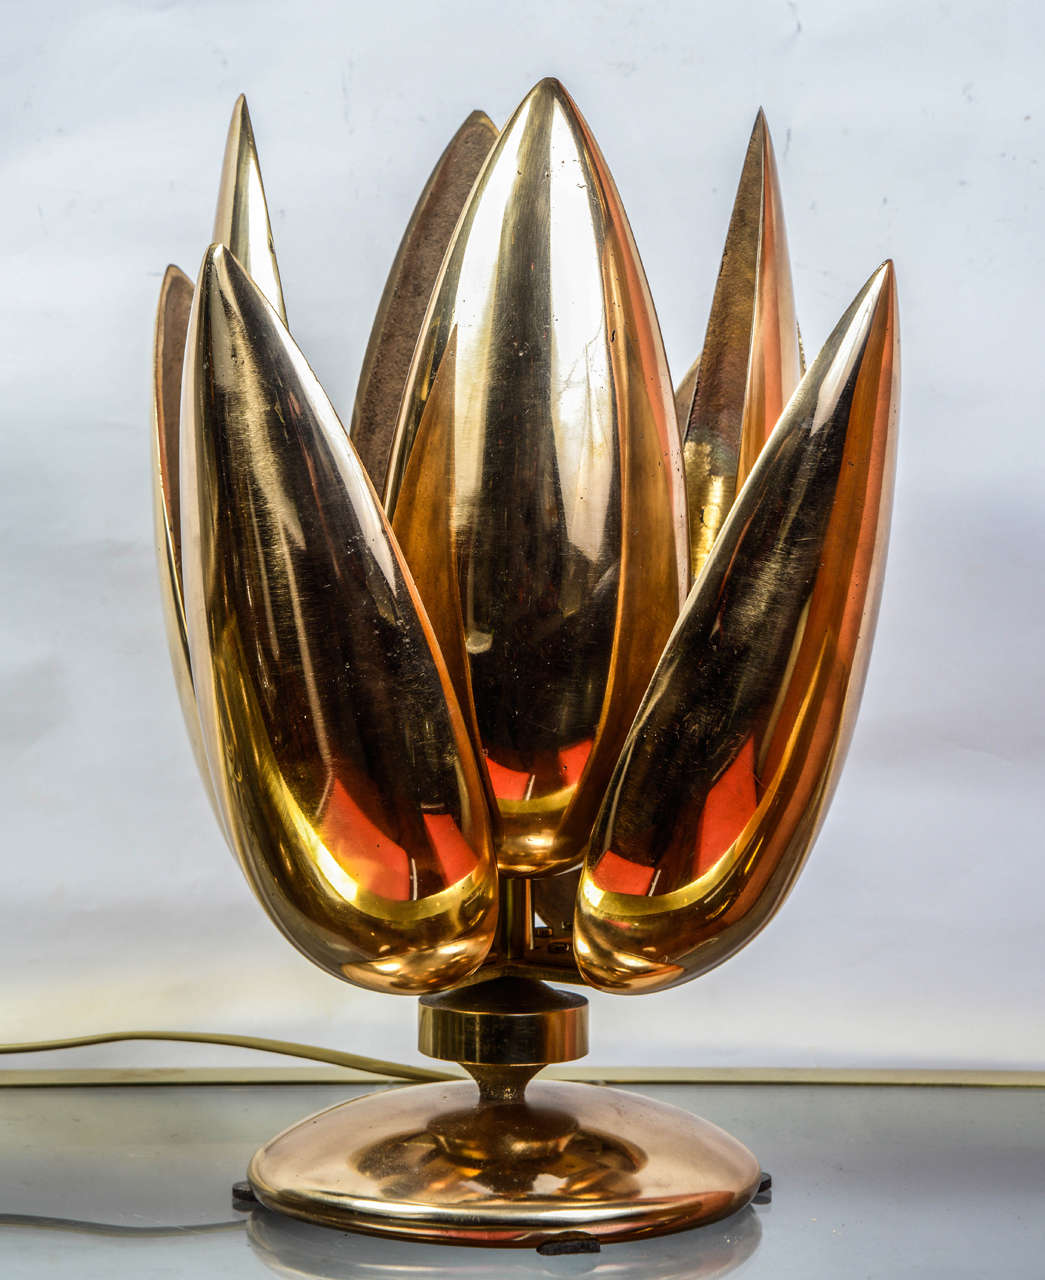 Pair of sculptural polished bronze table lamps.